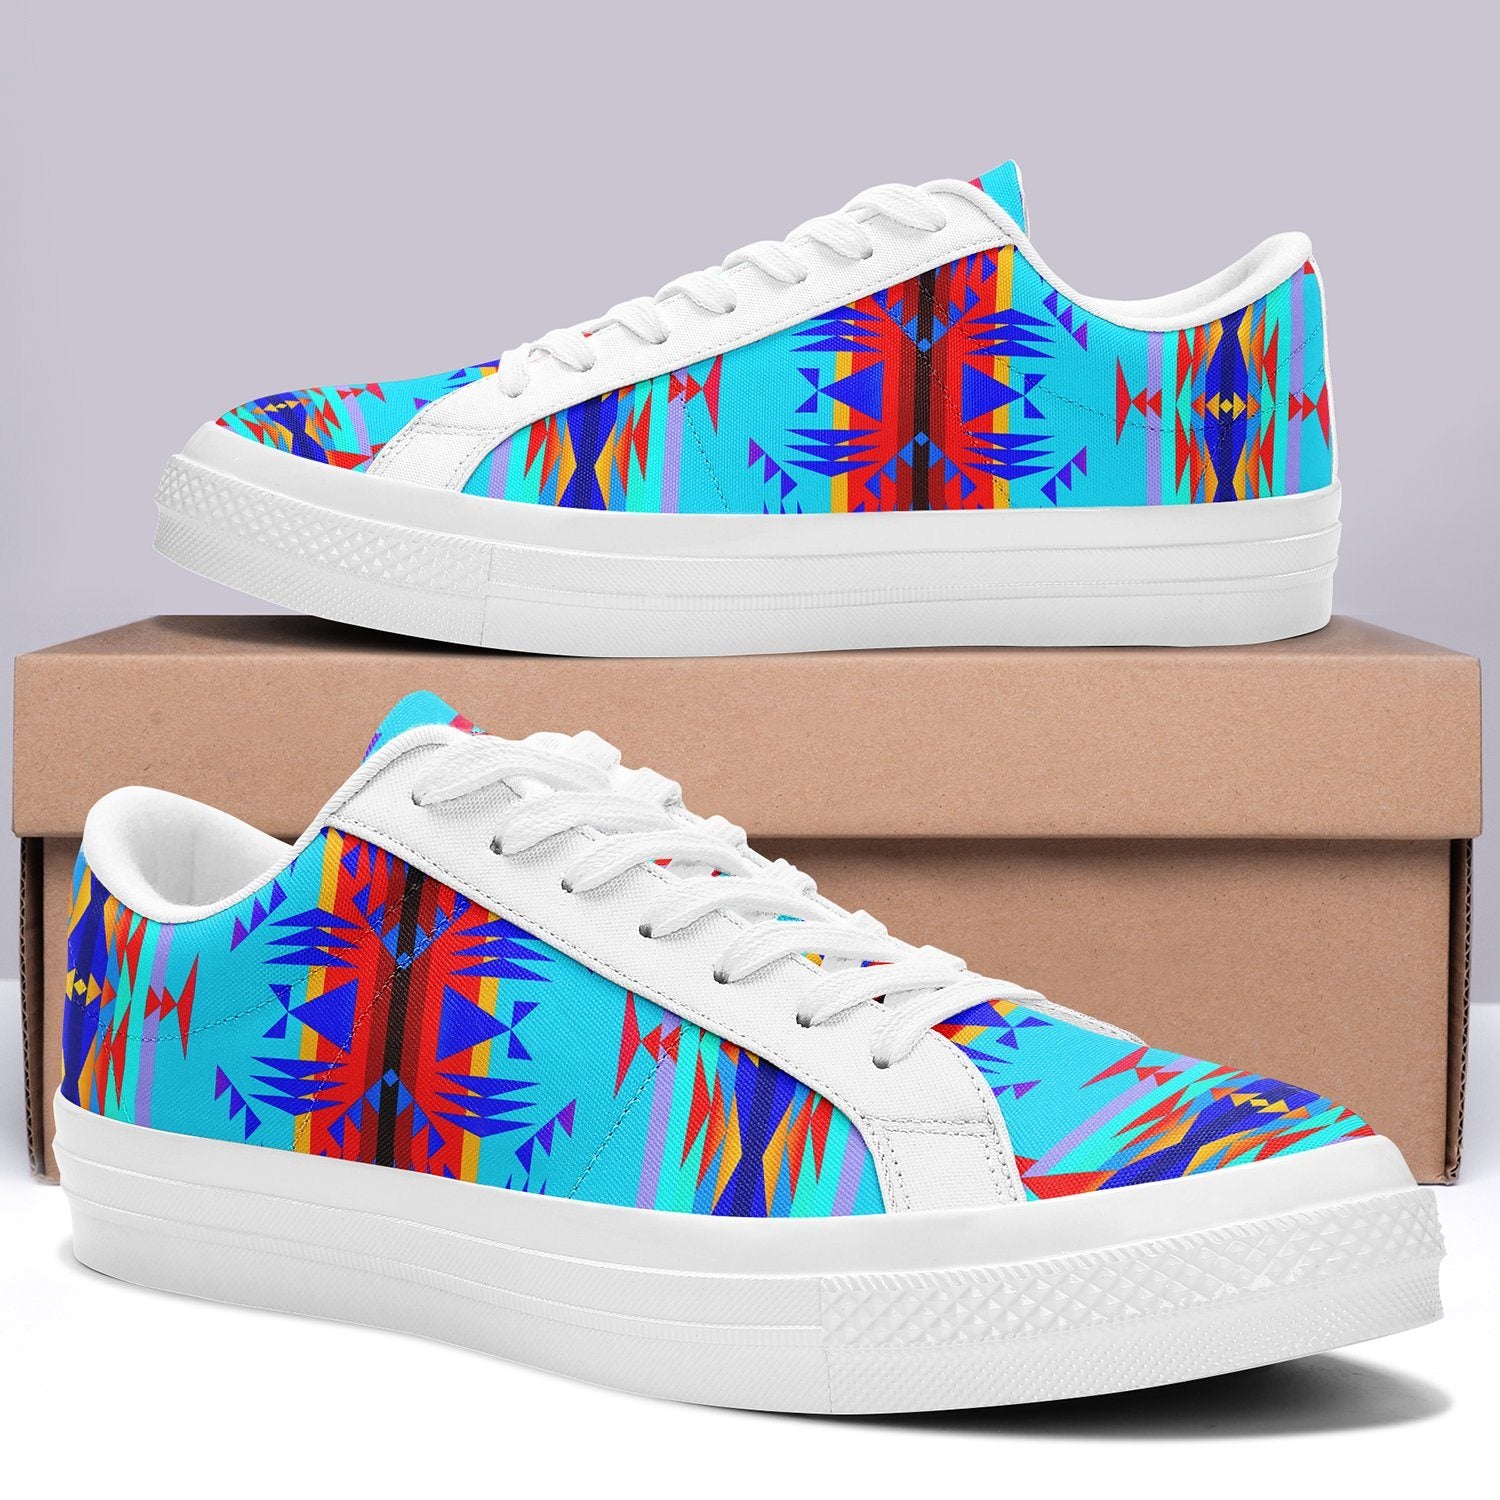 Between the Mountains Blue Aapisi Low Top Canvas Shoes White Sole 49 Dzine 